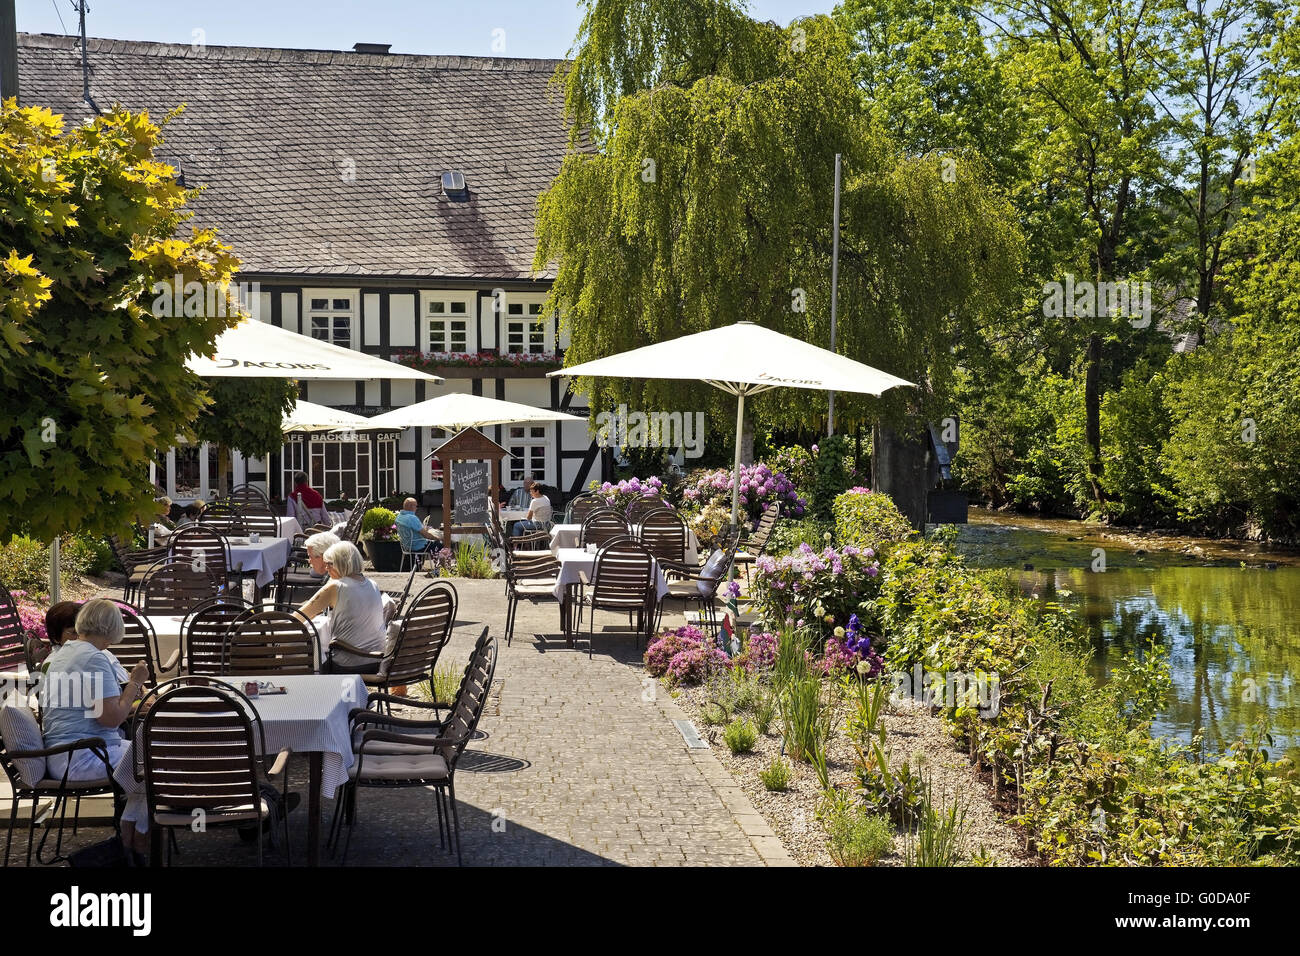 people in a garden cafe at the river Lenne Stock Photo